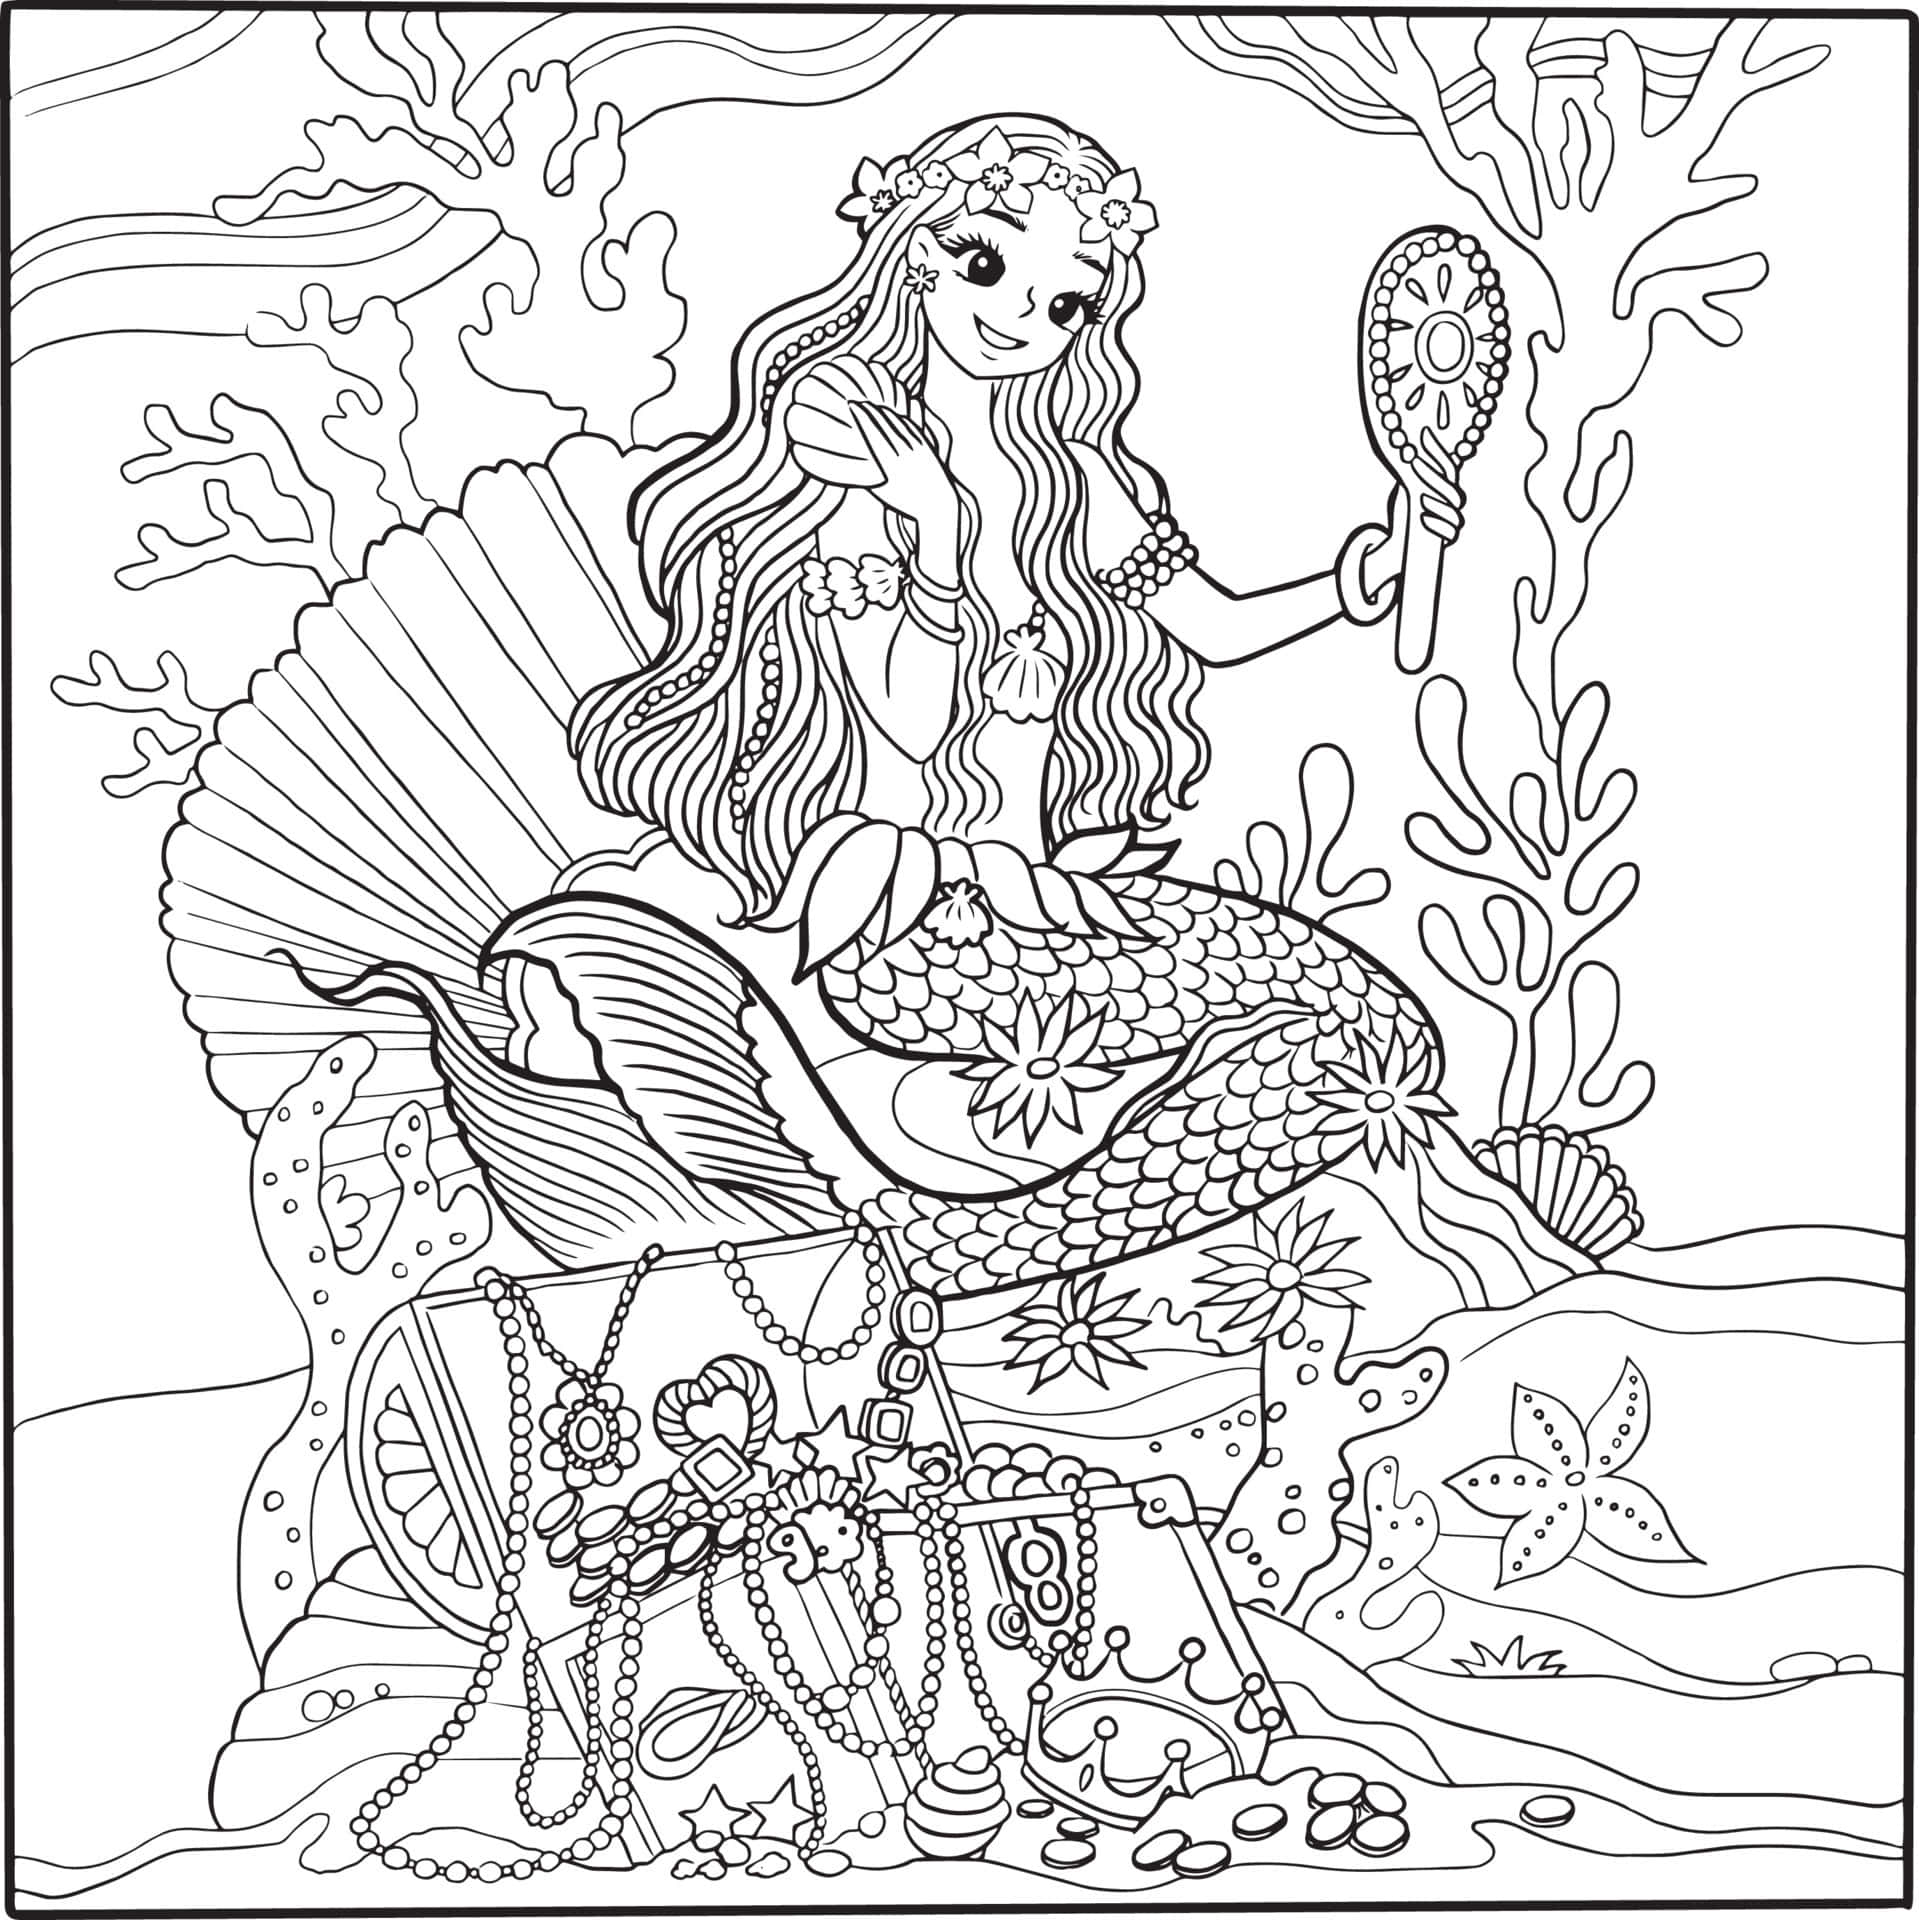 A Mermaid Coloring Page With A Mermaid Sitting On The Sea